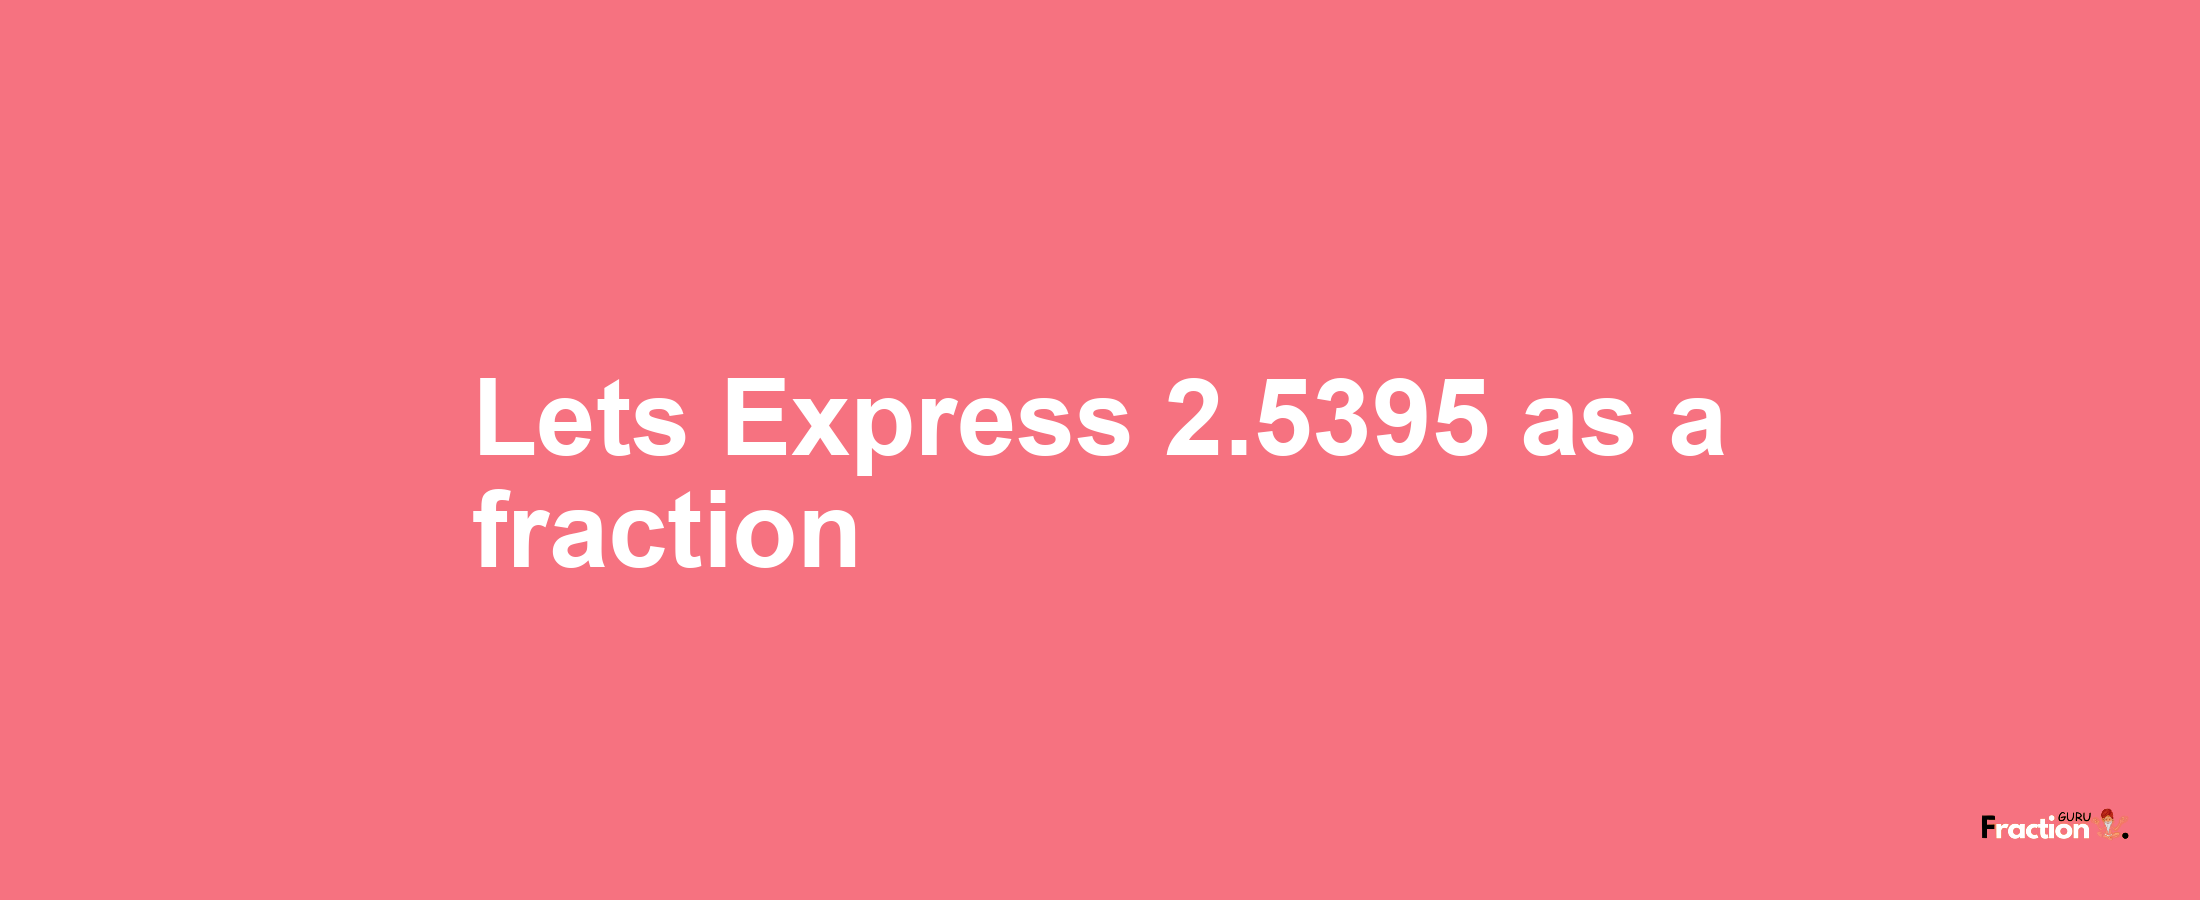 Lets Express 2.5395 as afraction